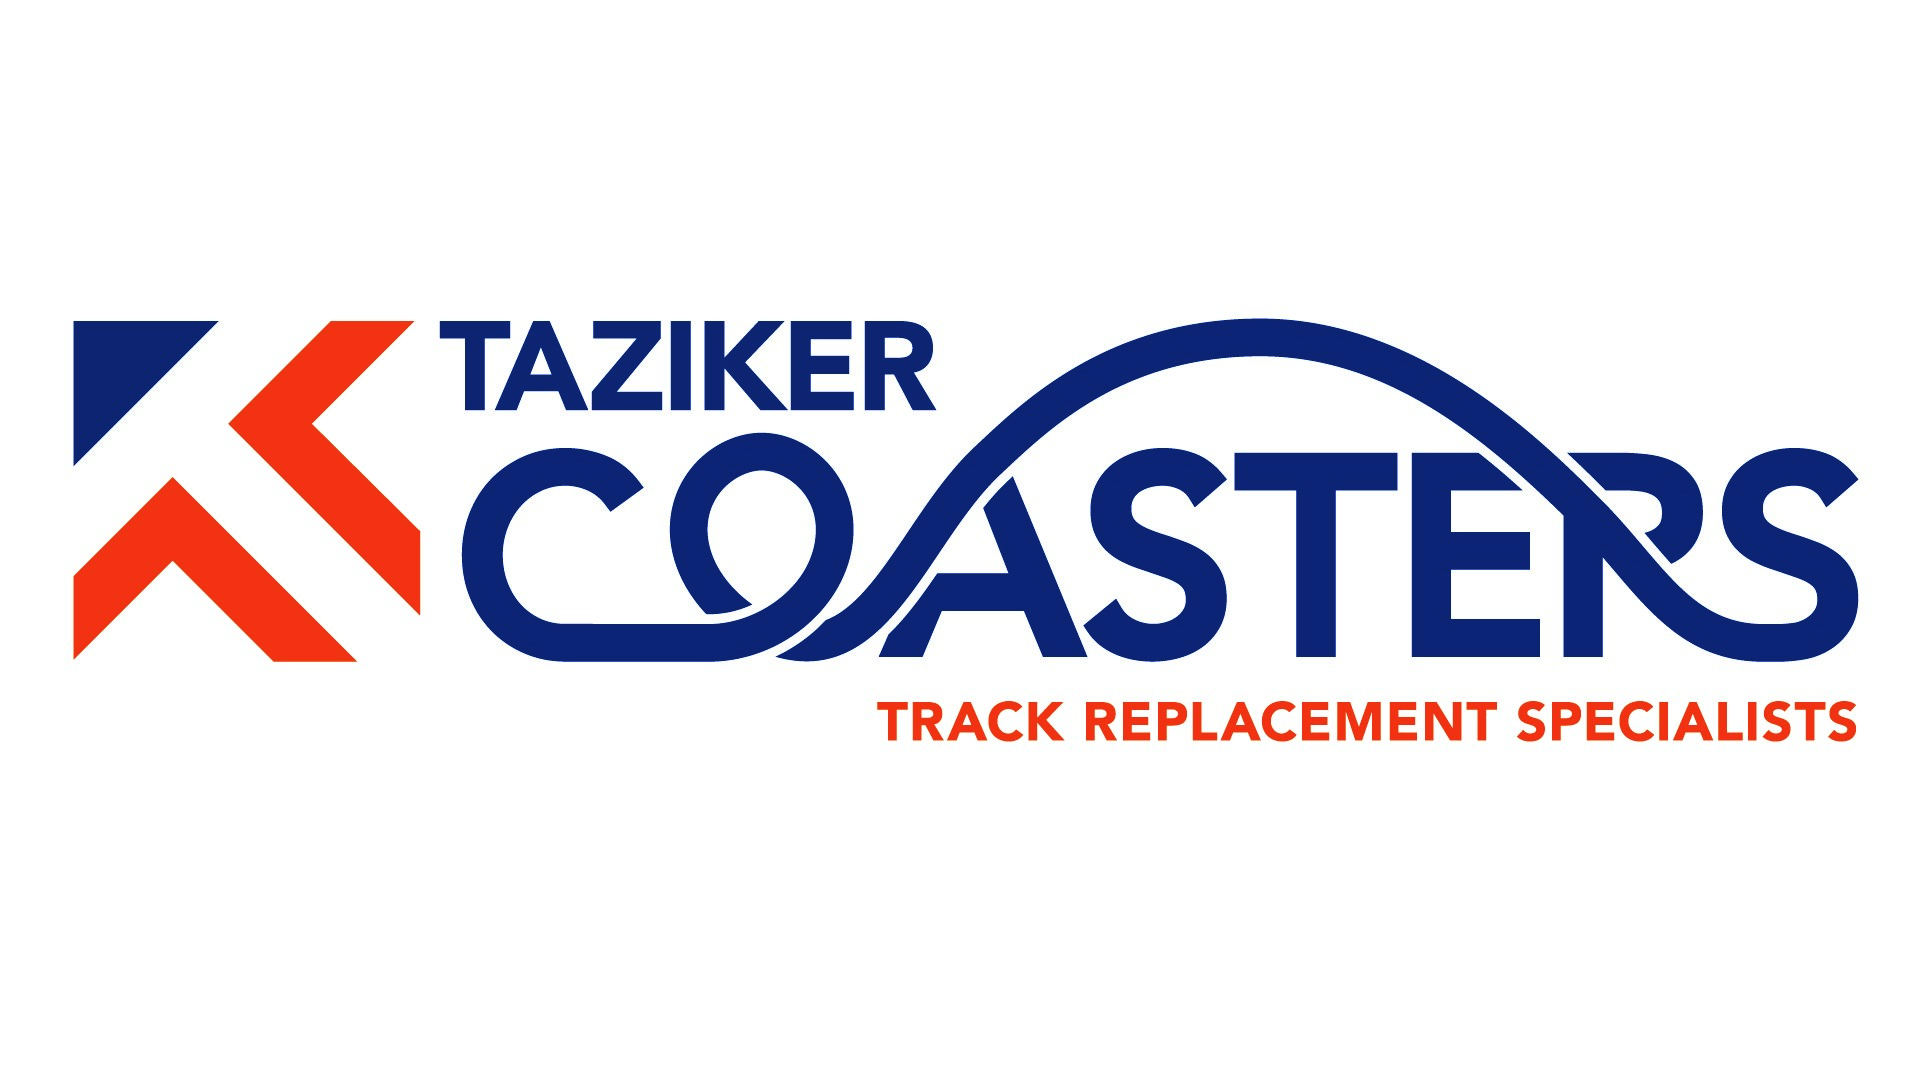 Taziker Coasters logo, track replacement specialists.